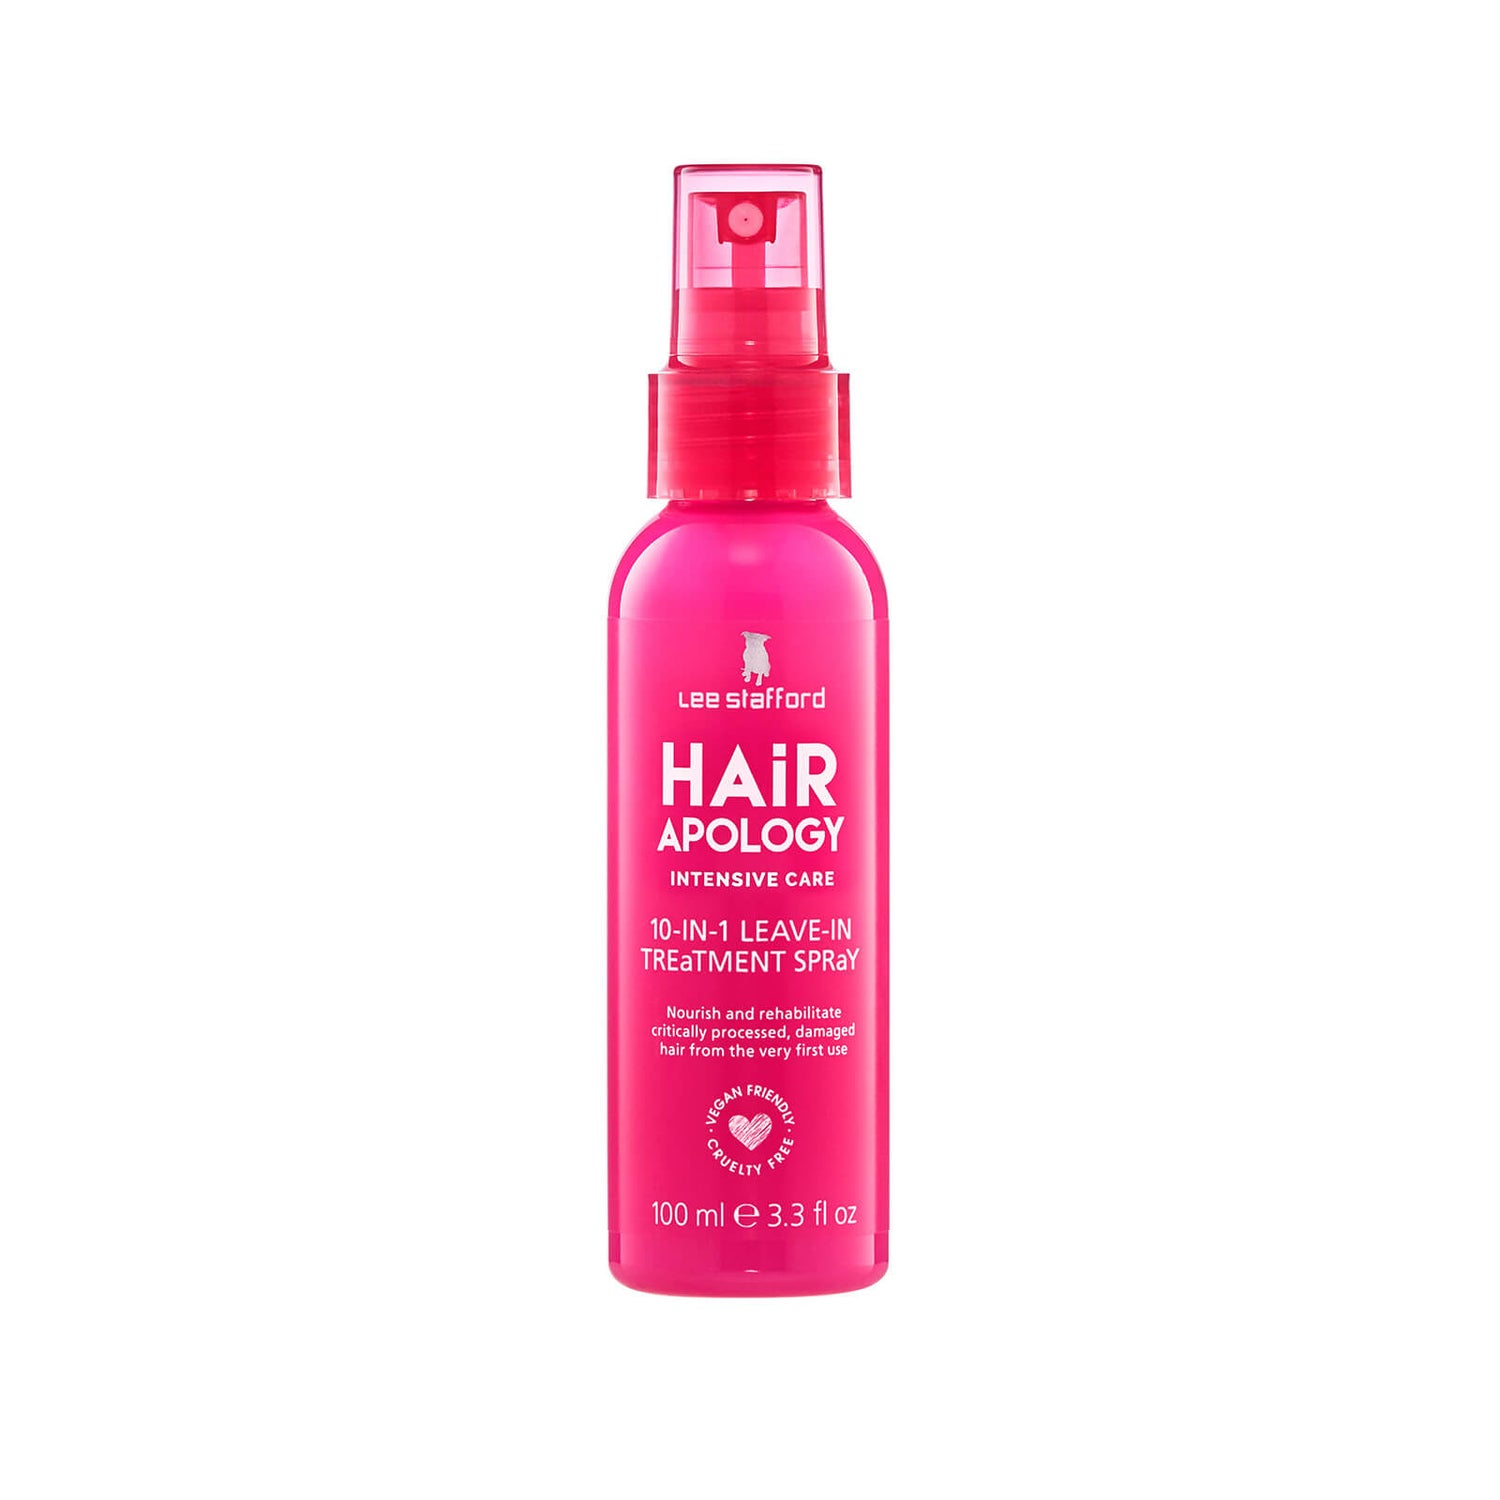 Lee Stafford Hair Apology 10 in 1 Leave In Treatment Spray 100ml | Free US  Shipping | lookfantastic